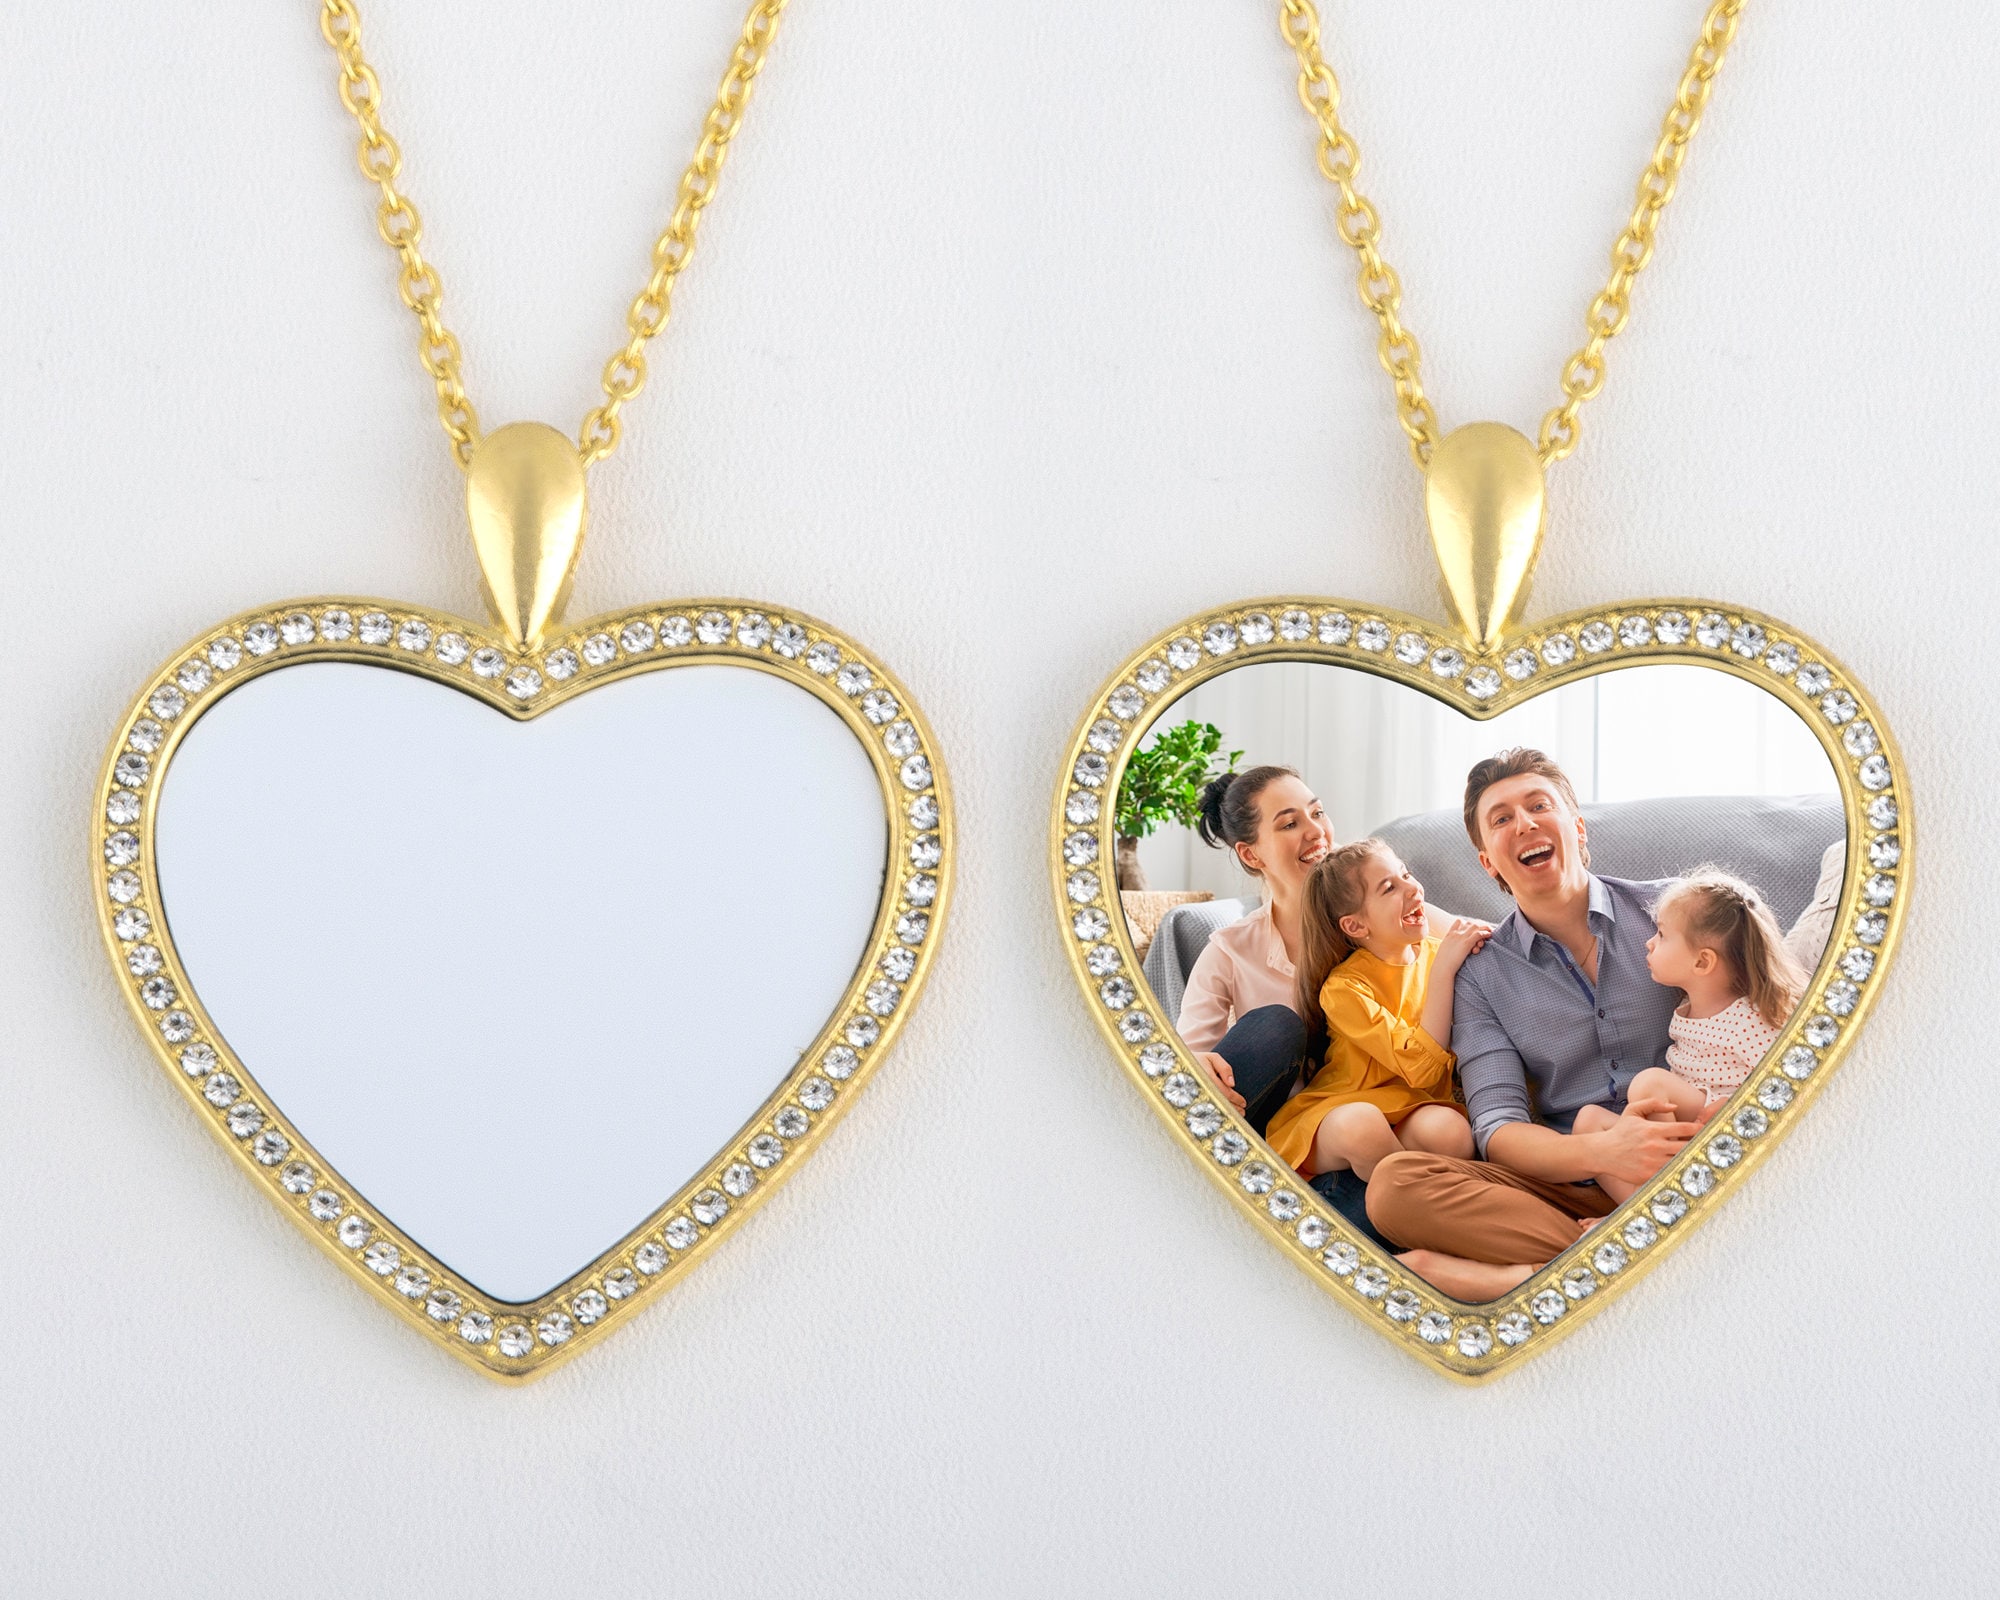 12pcs Sublimation Blank Heart Necklace DIY Personalized